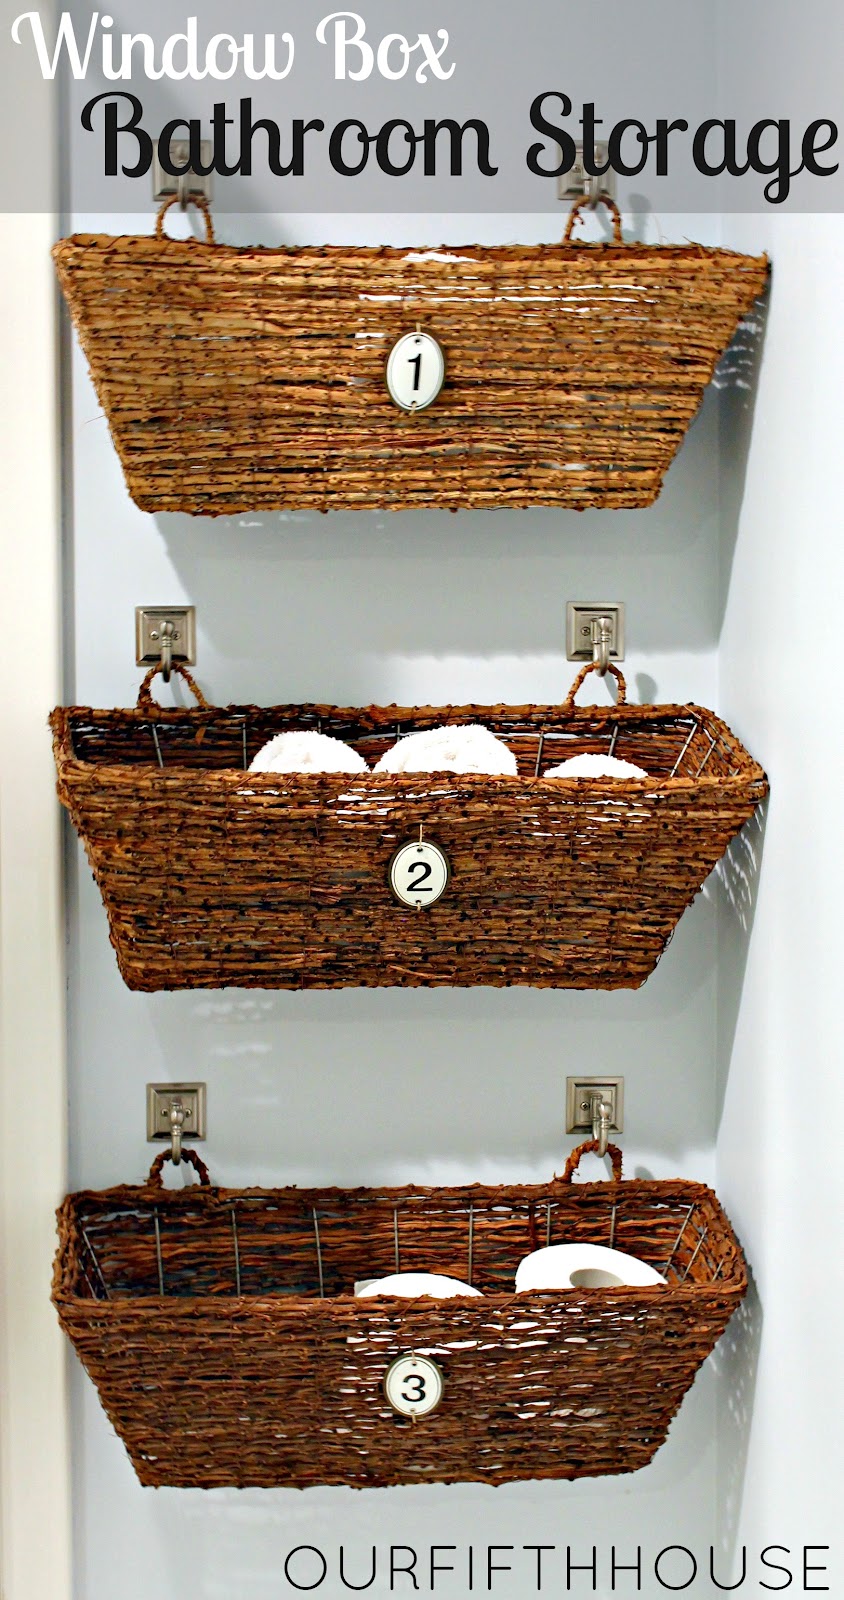 ... these wicker window boxes I turned into bathroom storage containers